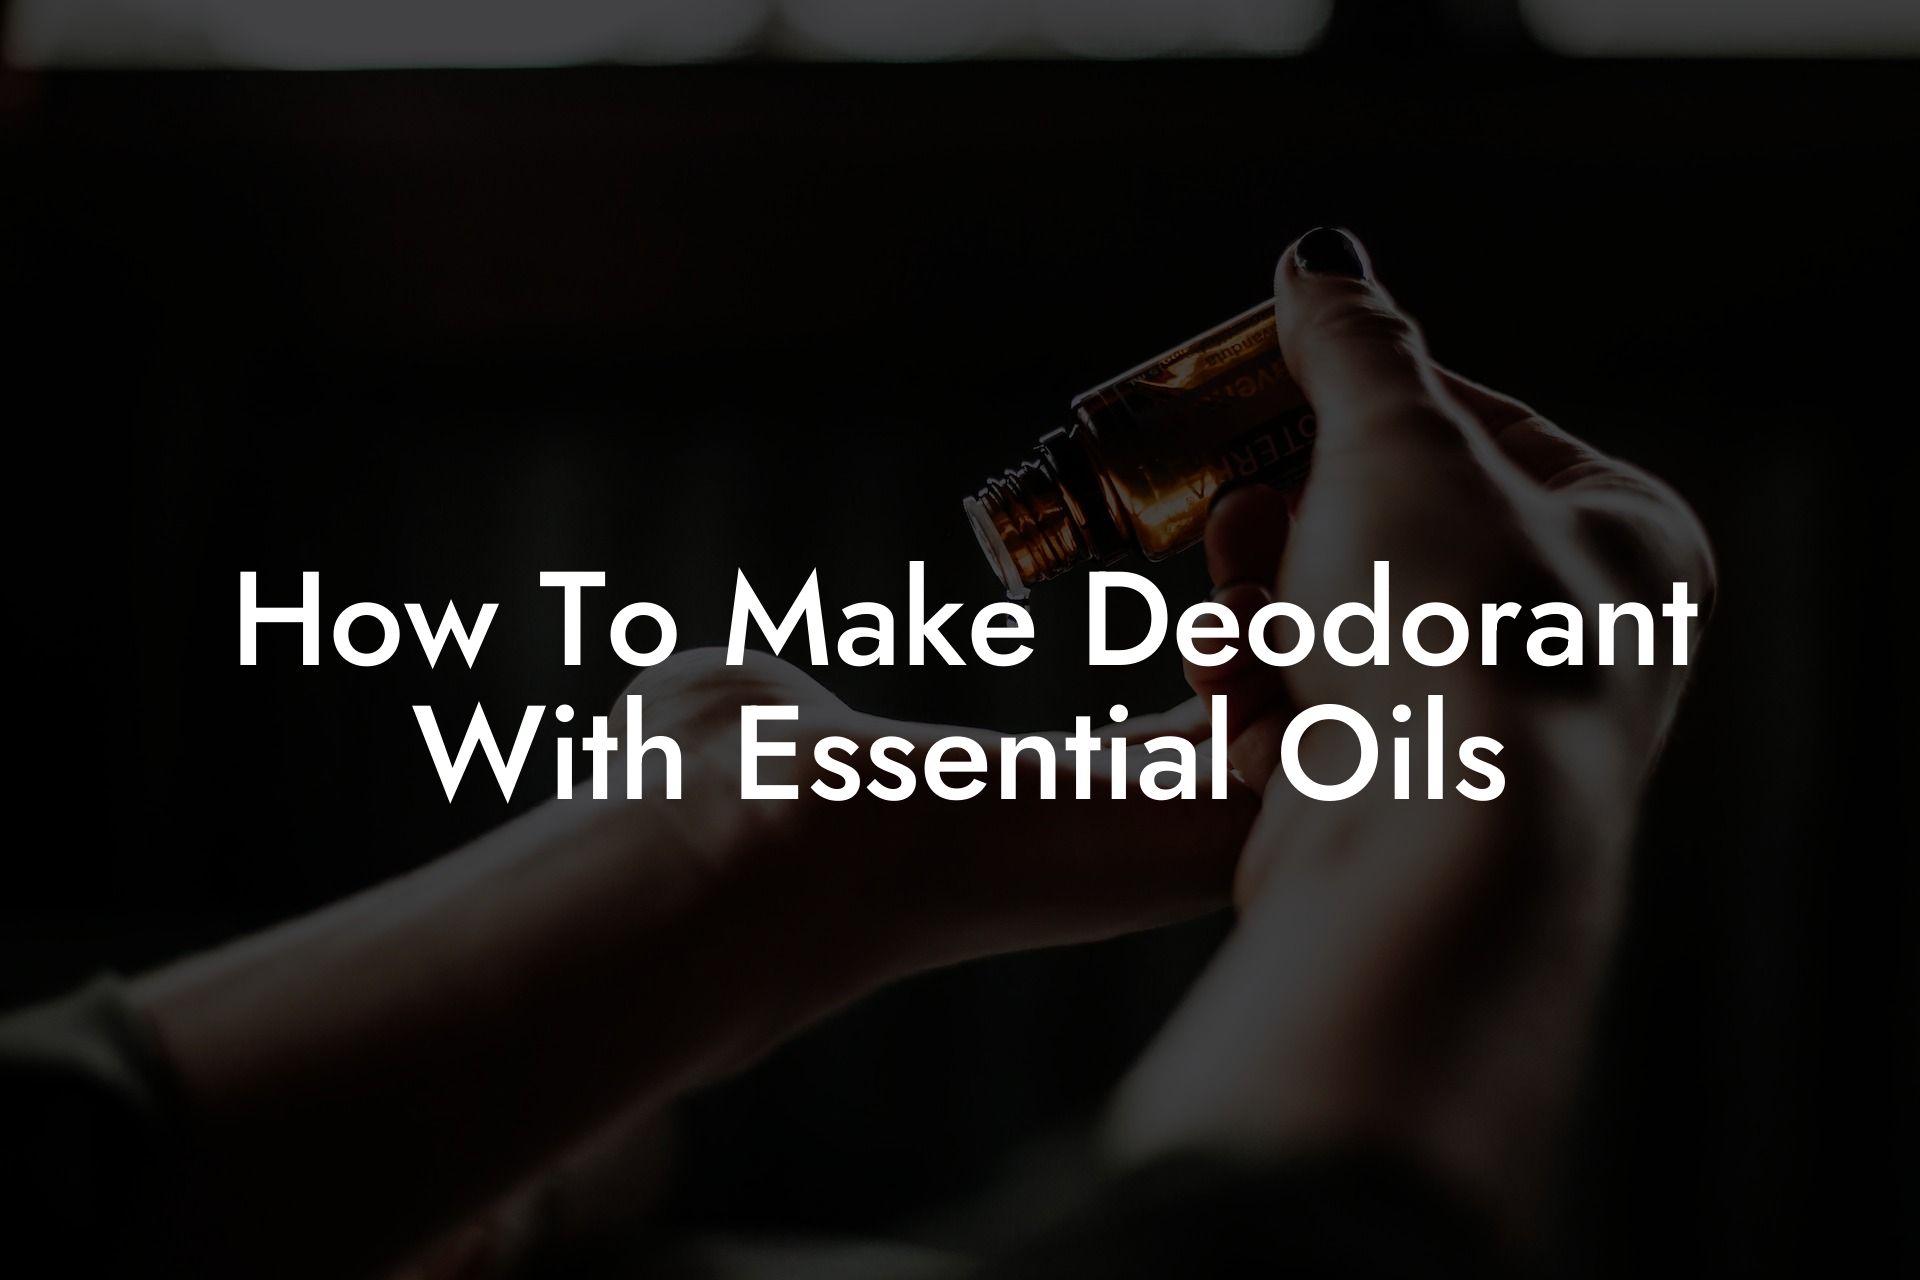 How To Make Deodorant With Essential Oils